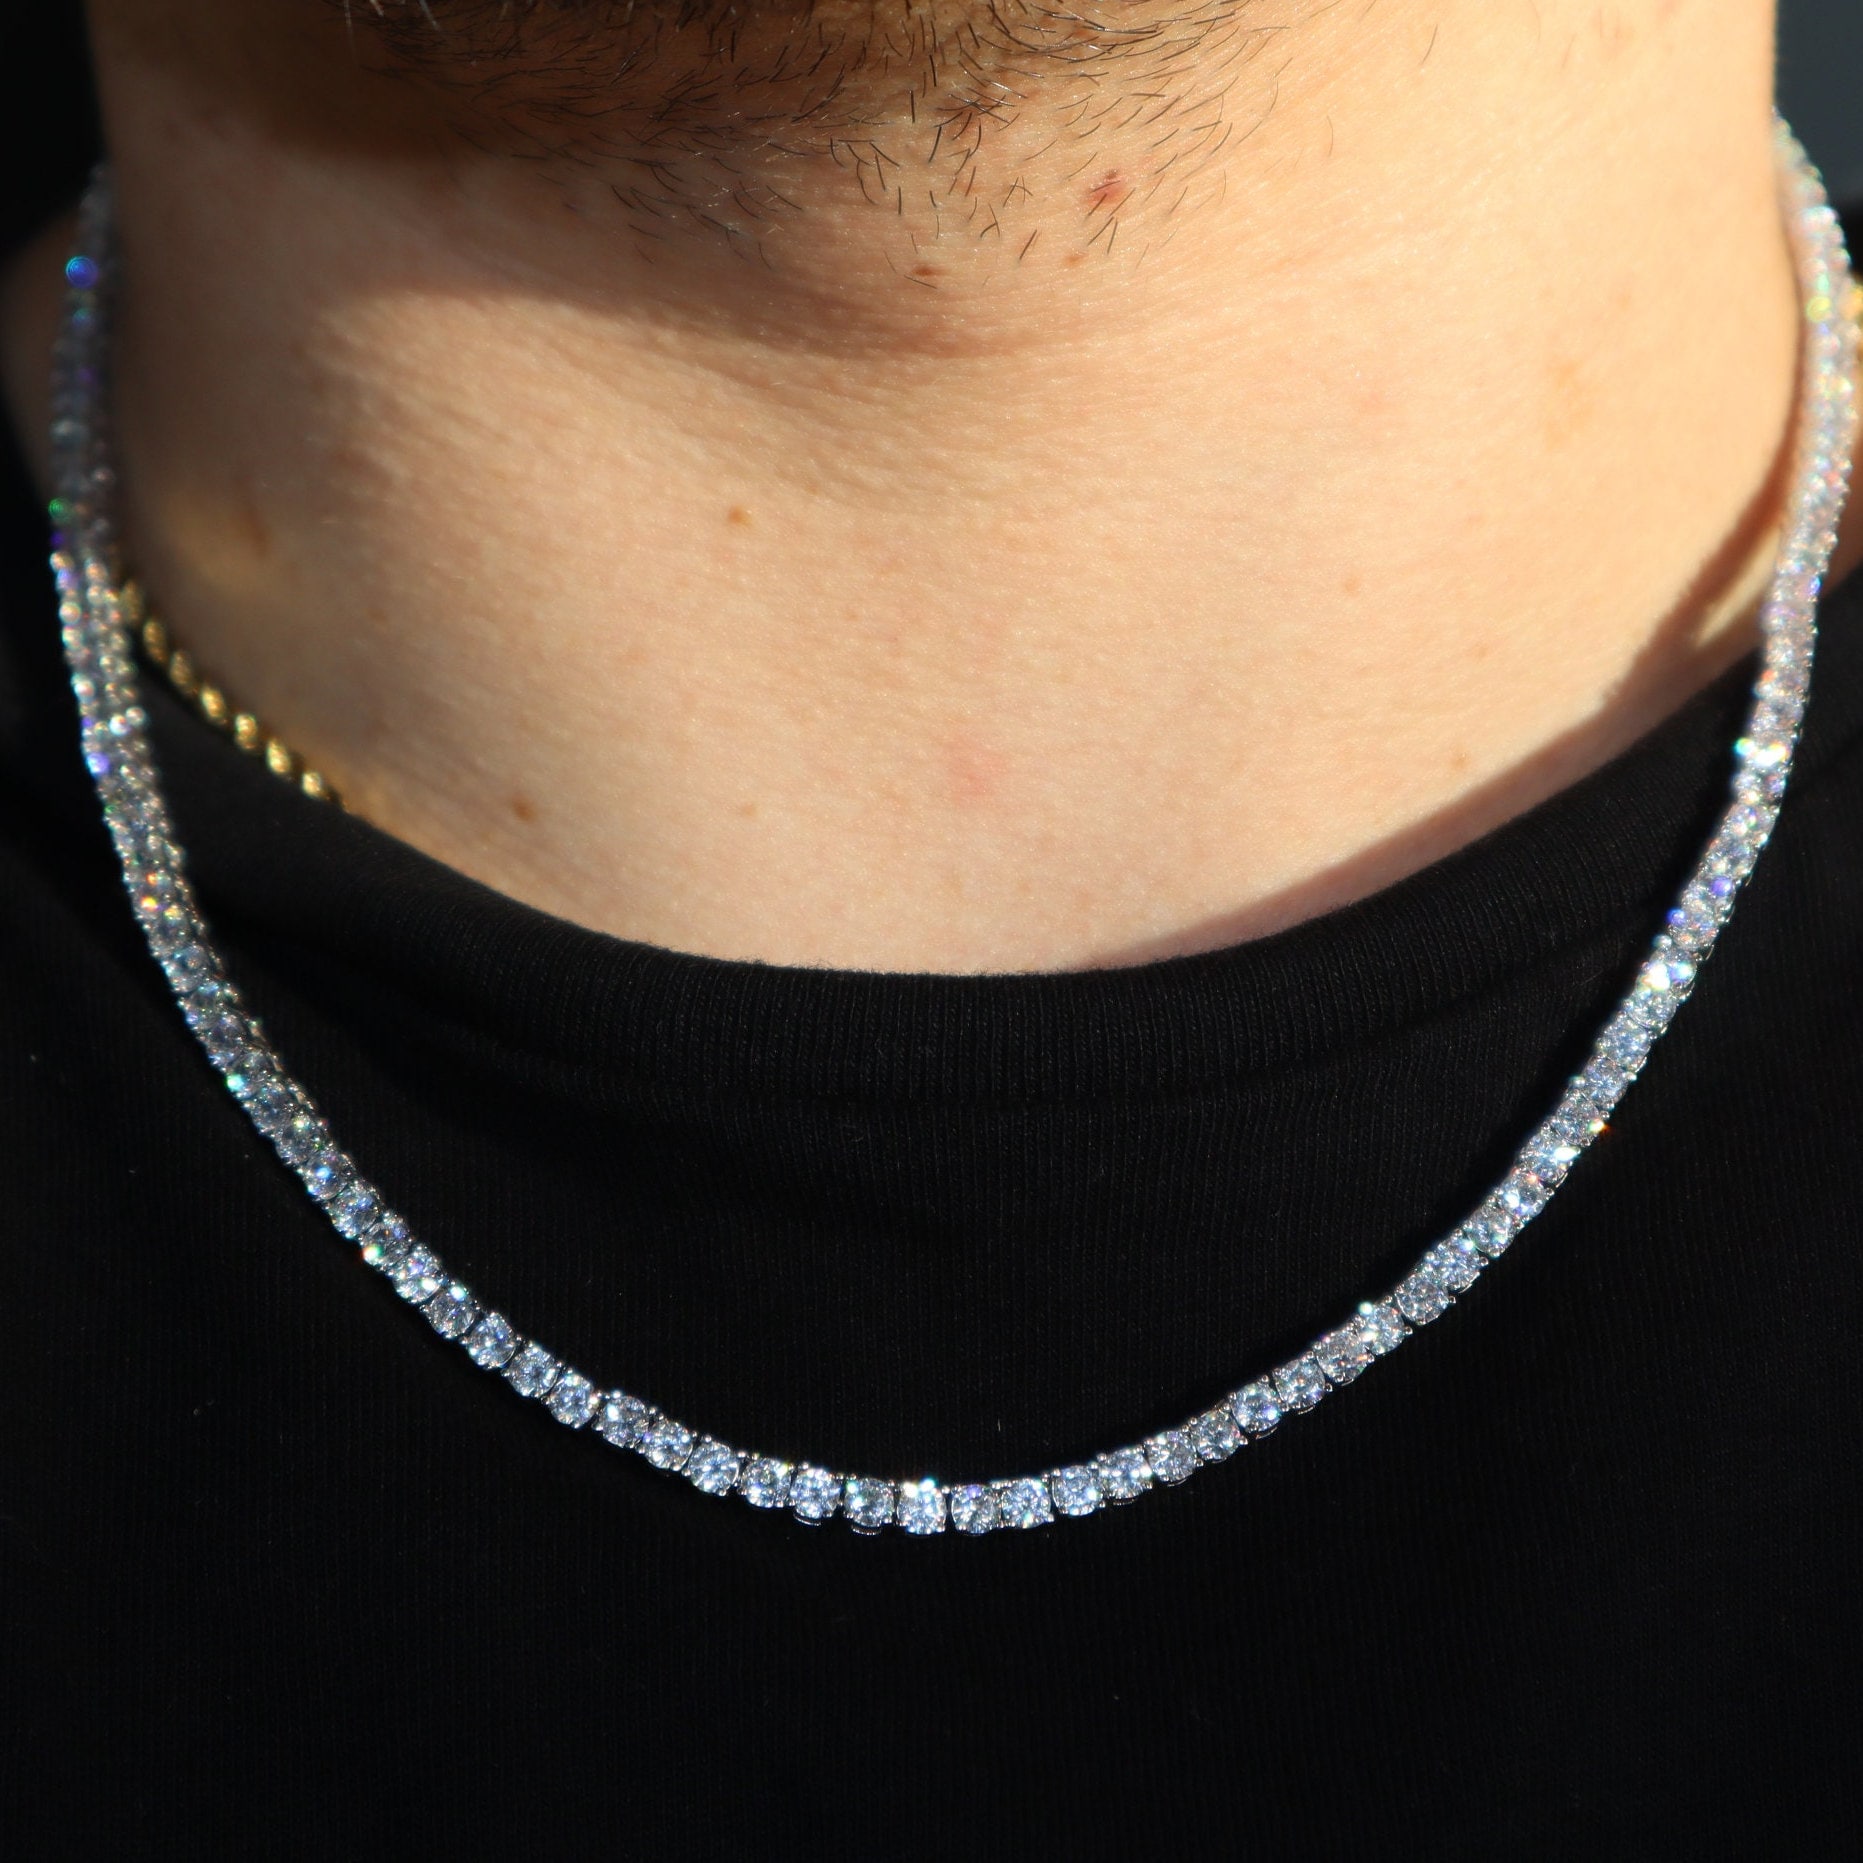 TRIPOD JEWELRY 10mm Tennis Choker Simulated Diamond Necklace Gold, 18K Gold  Plated Chain for Men（18K Gold，16”） | Amazon.com